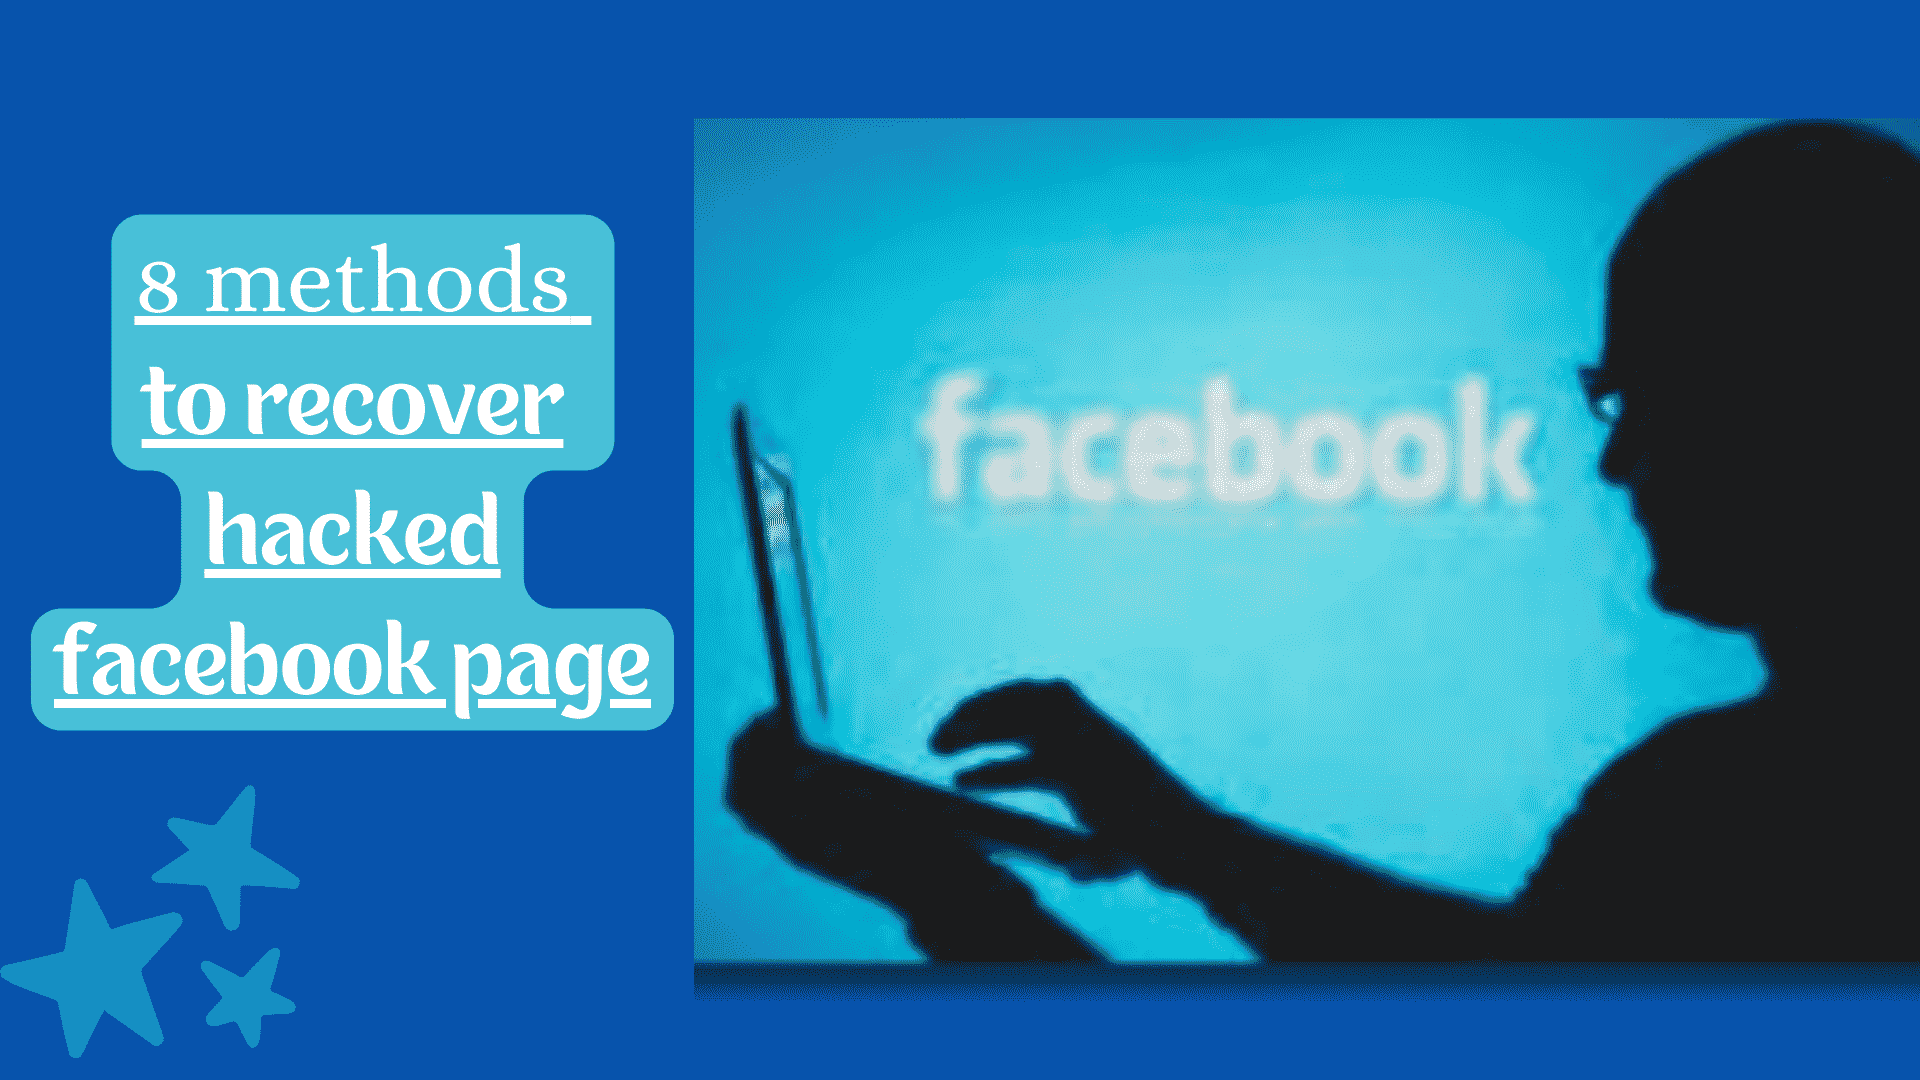 8 methods to recover hacked facebook page